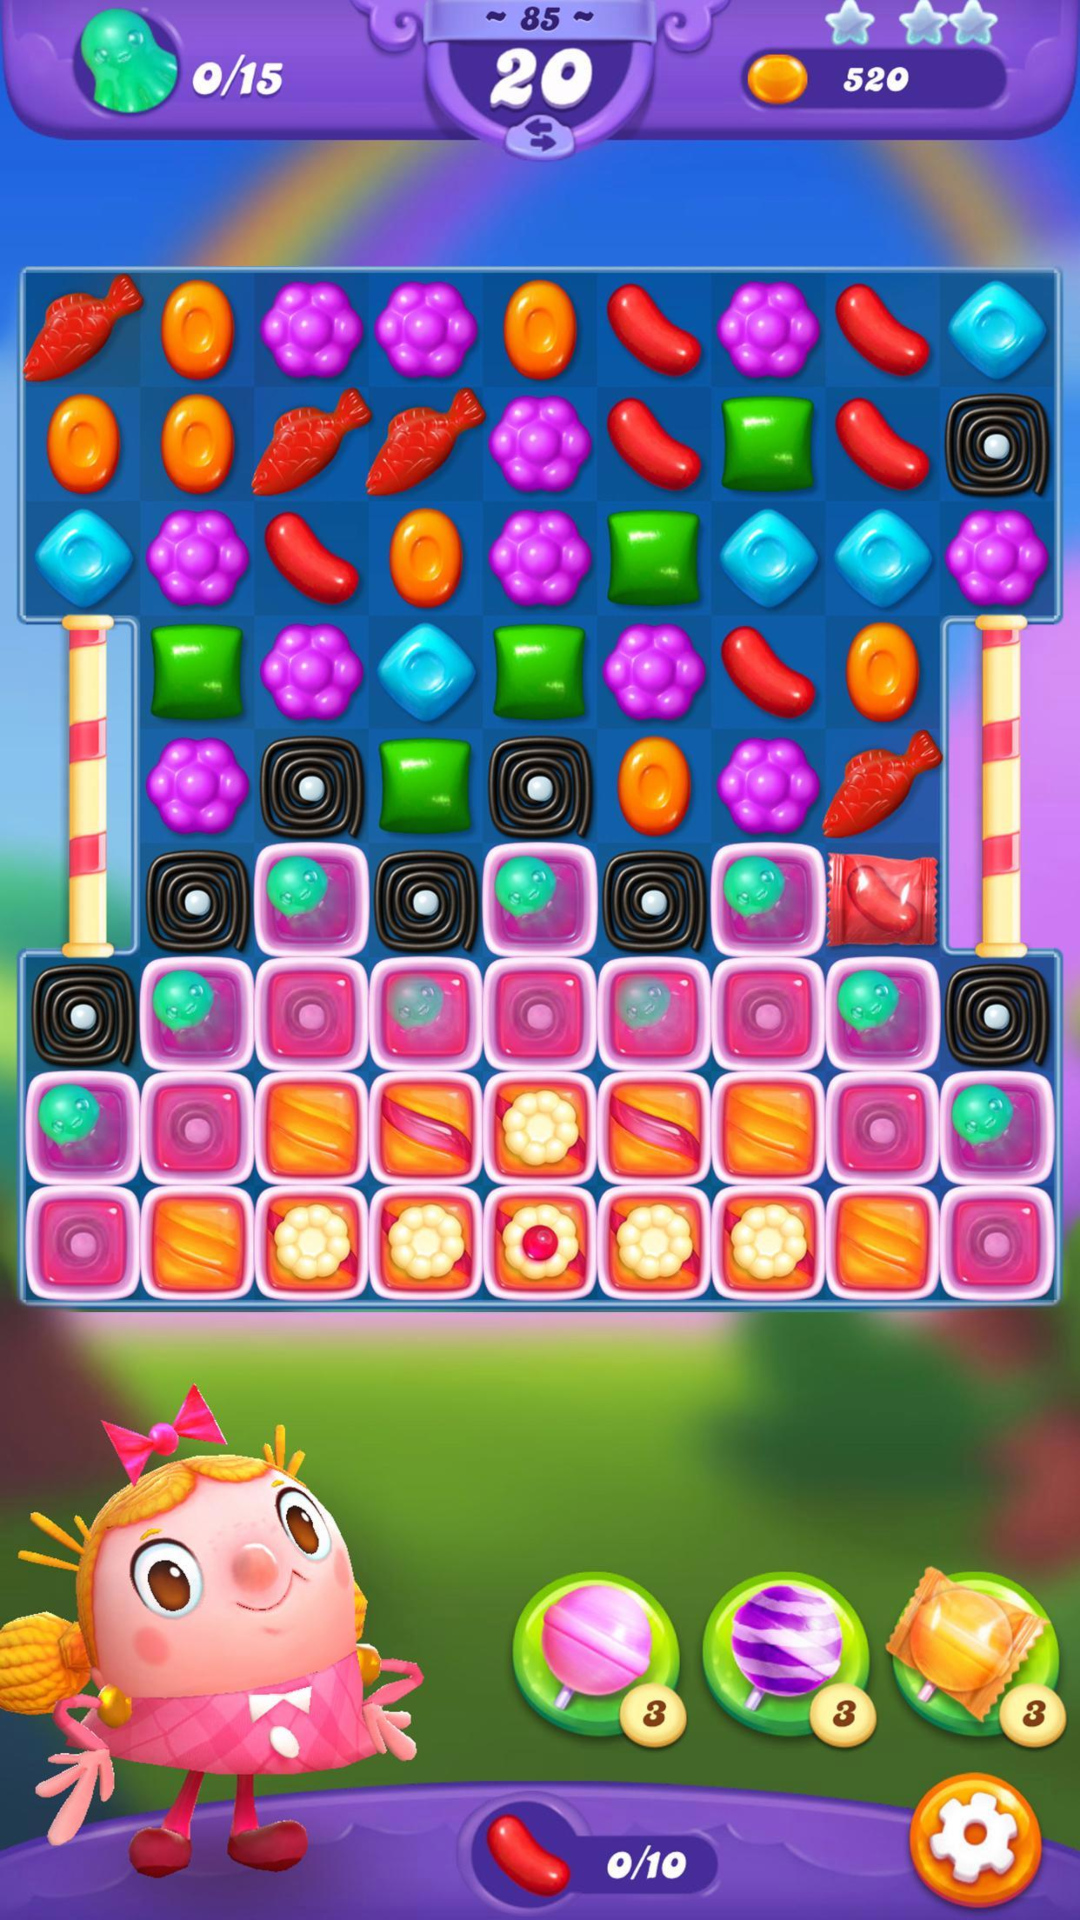 candy crush saga game free download for pc windows 7 ultimate